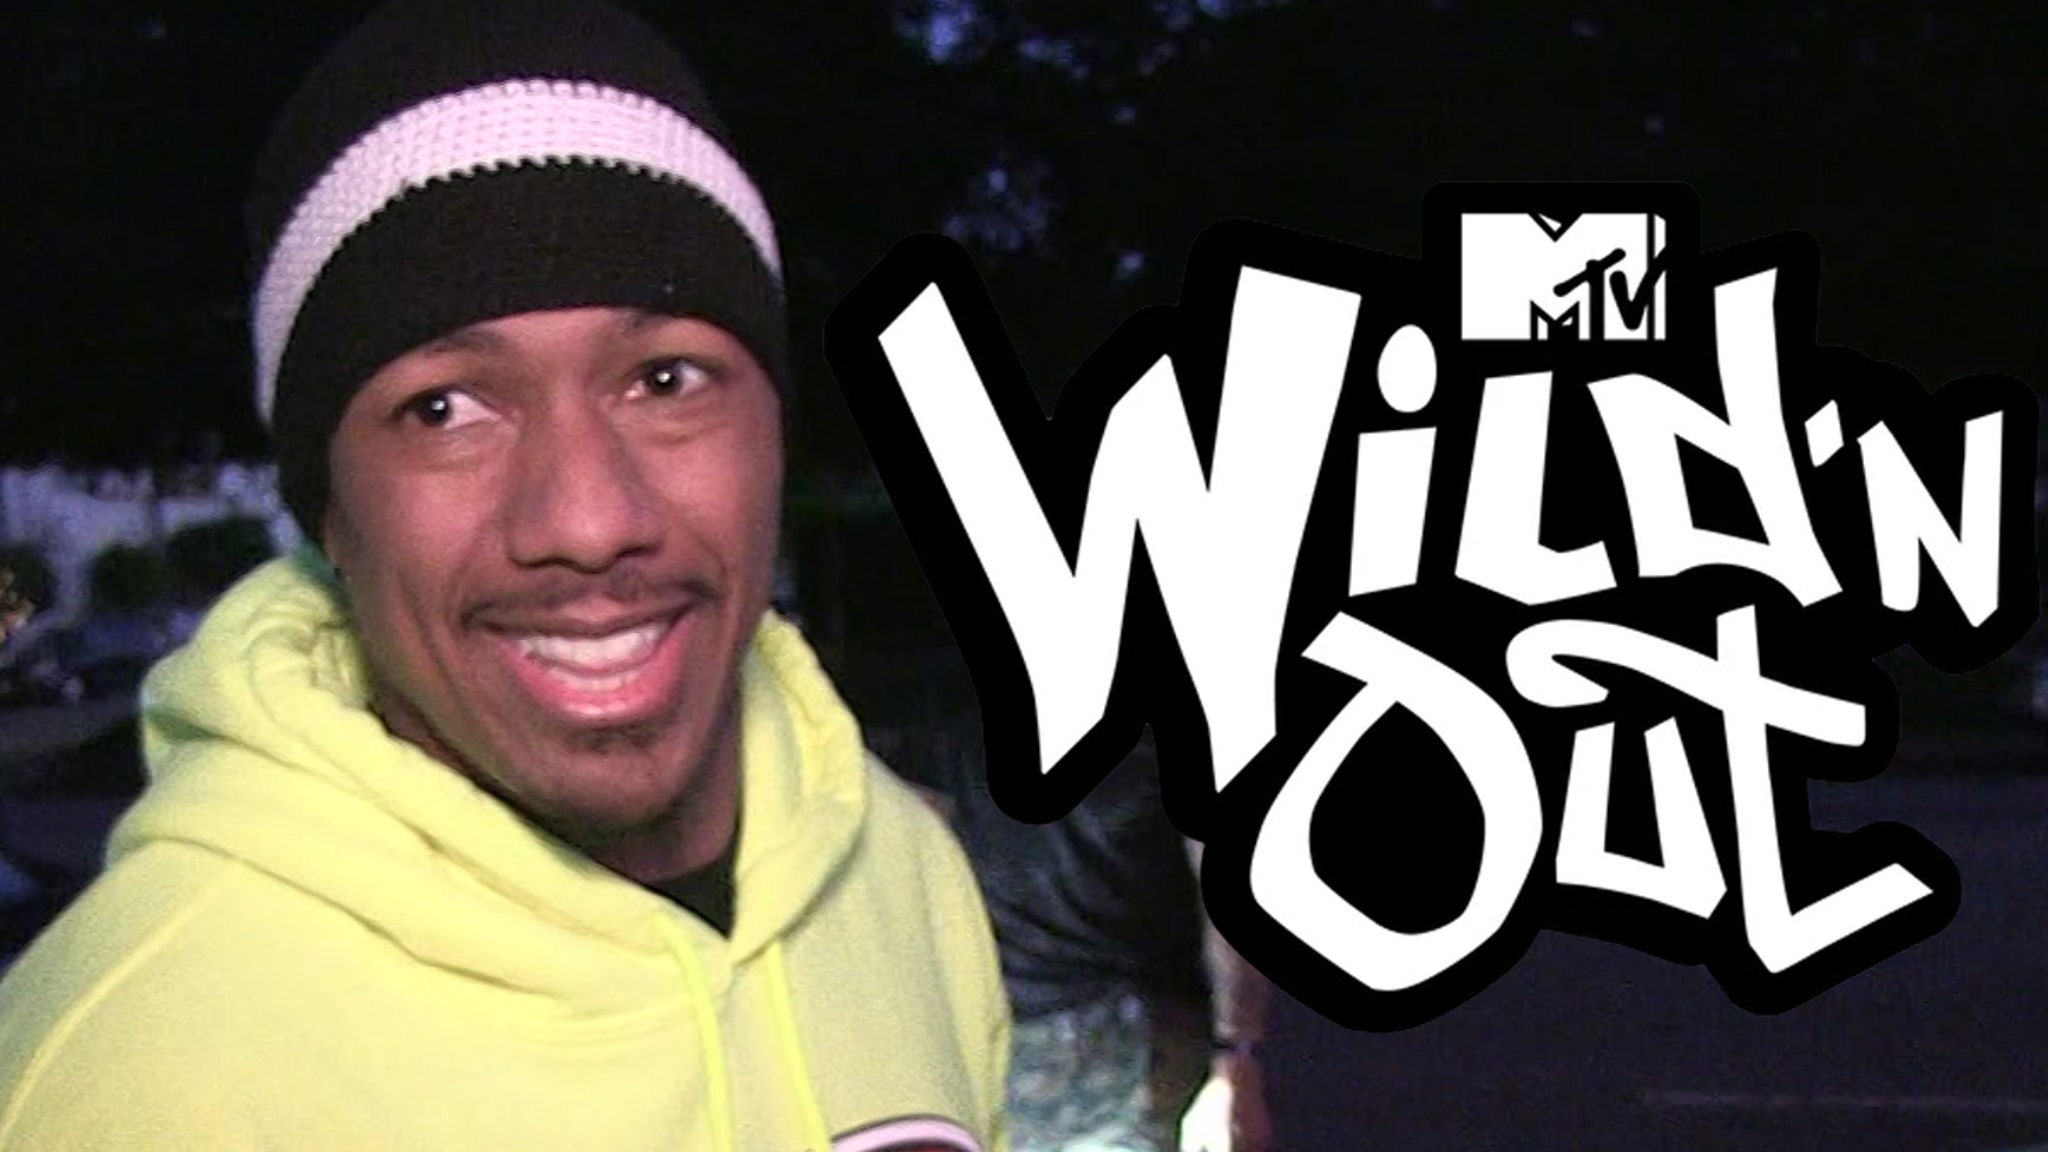 Nick Cannon will present ‘Wild’ N Out ‘again after the summer shoot